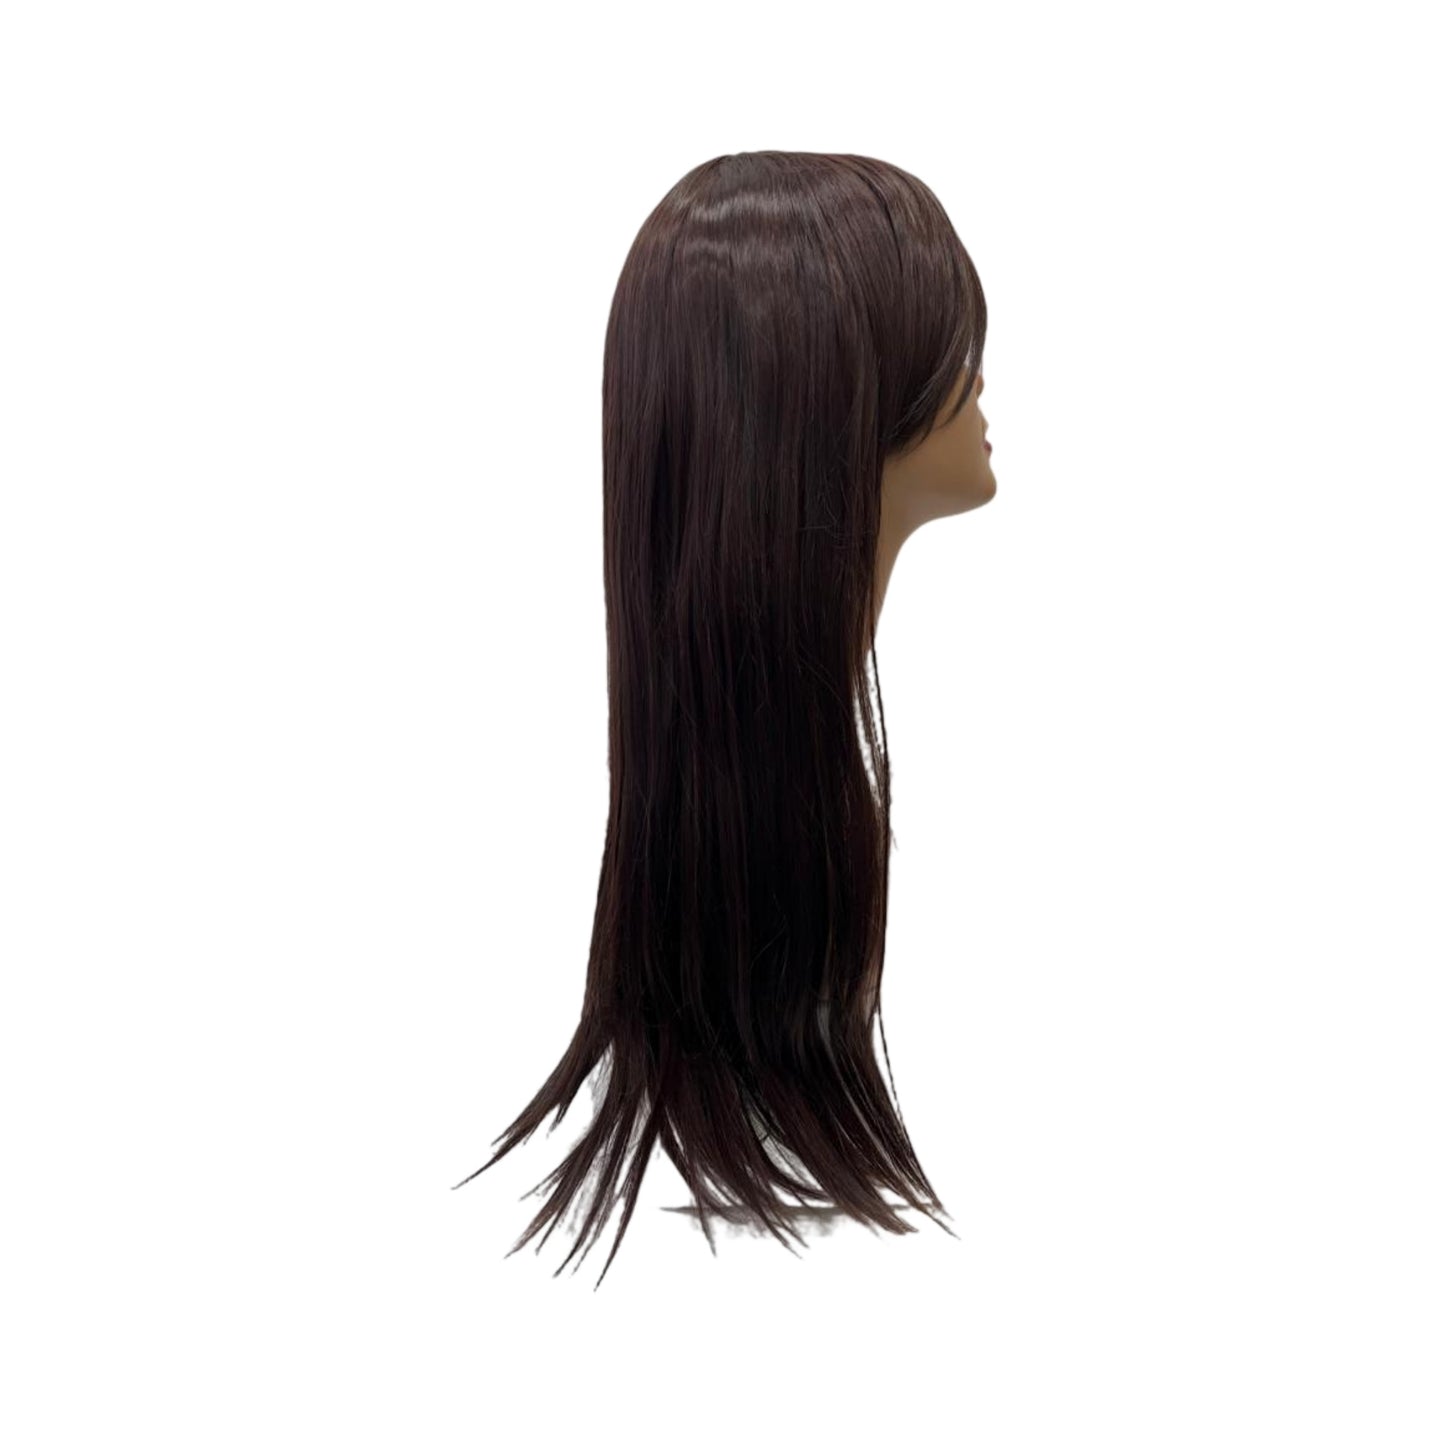 Long Synthetic Wig (#2/33) | A-008 | 28 inches | Durable | Breathable Cap